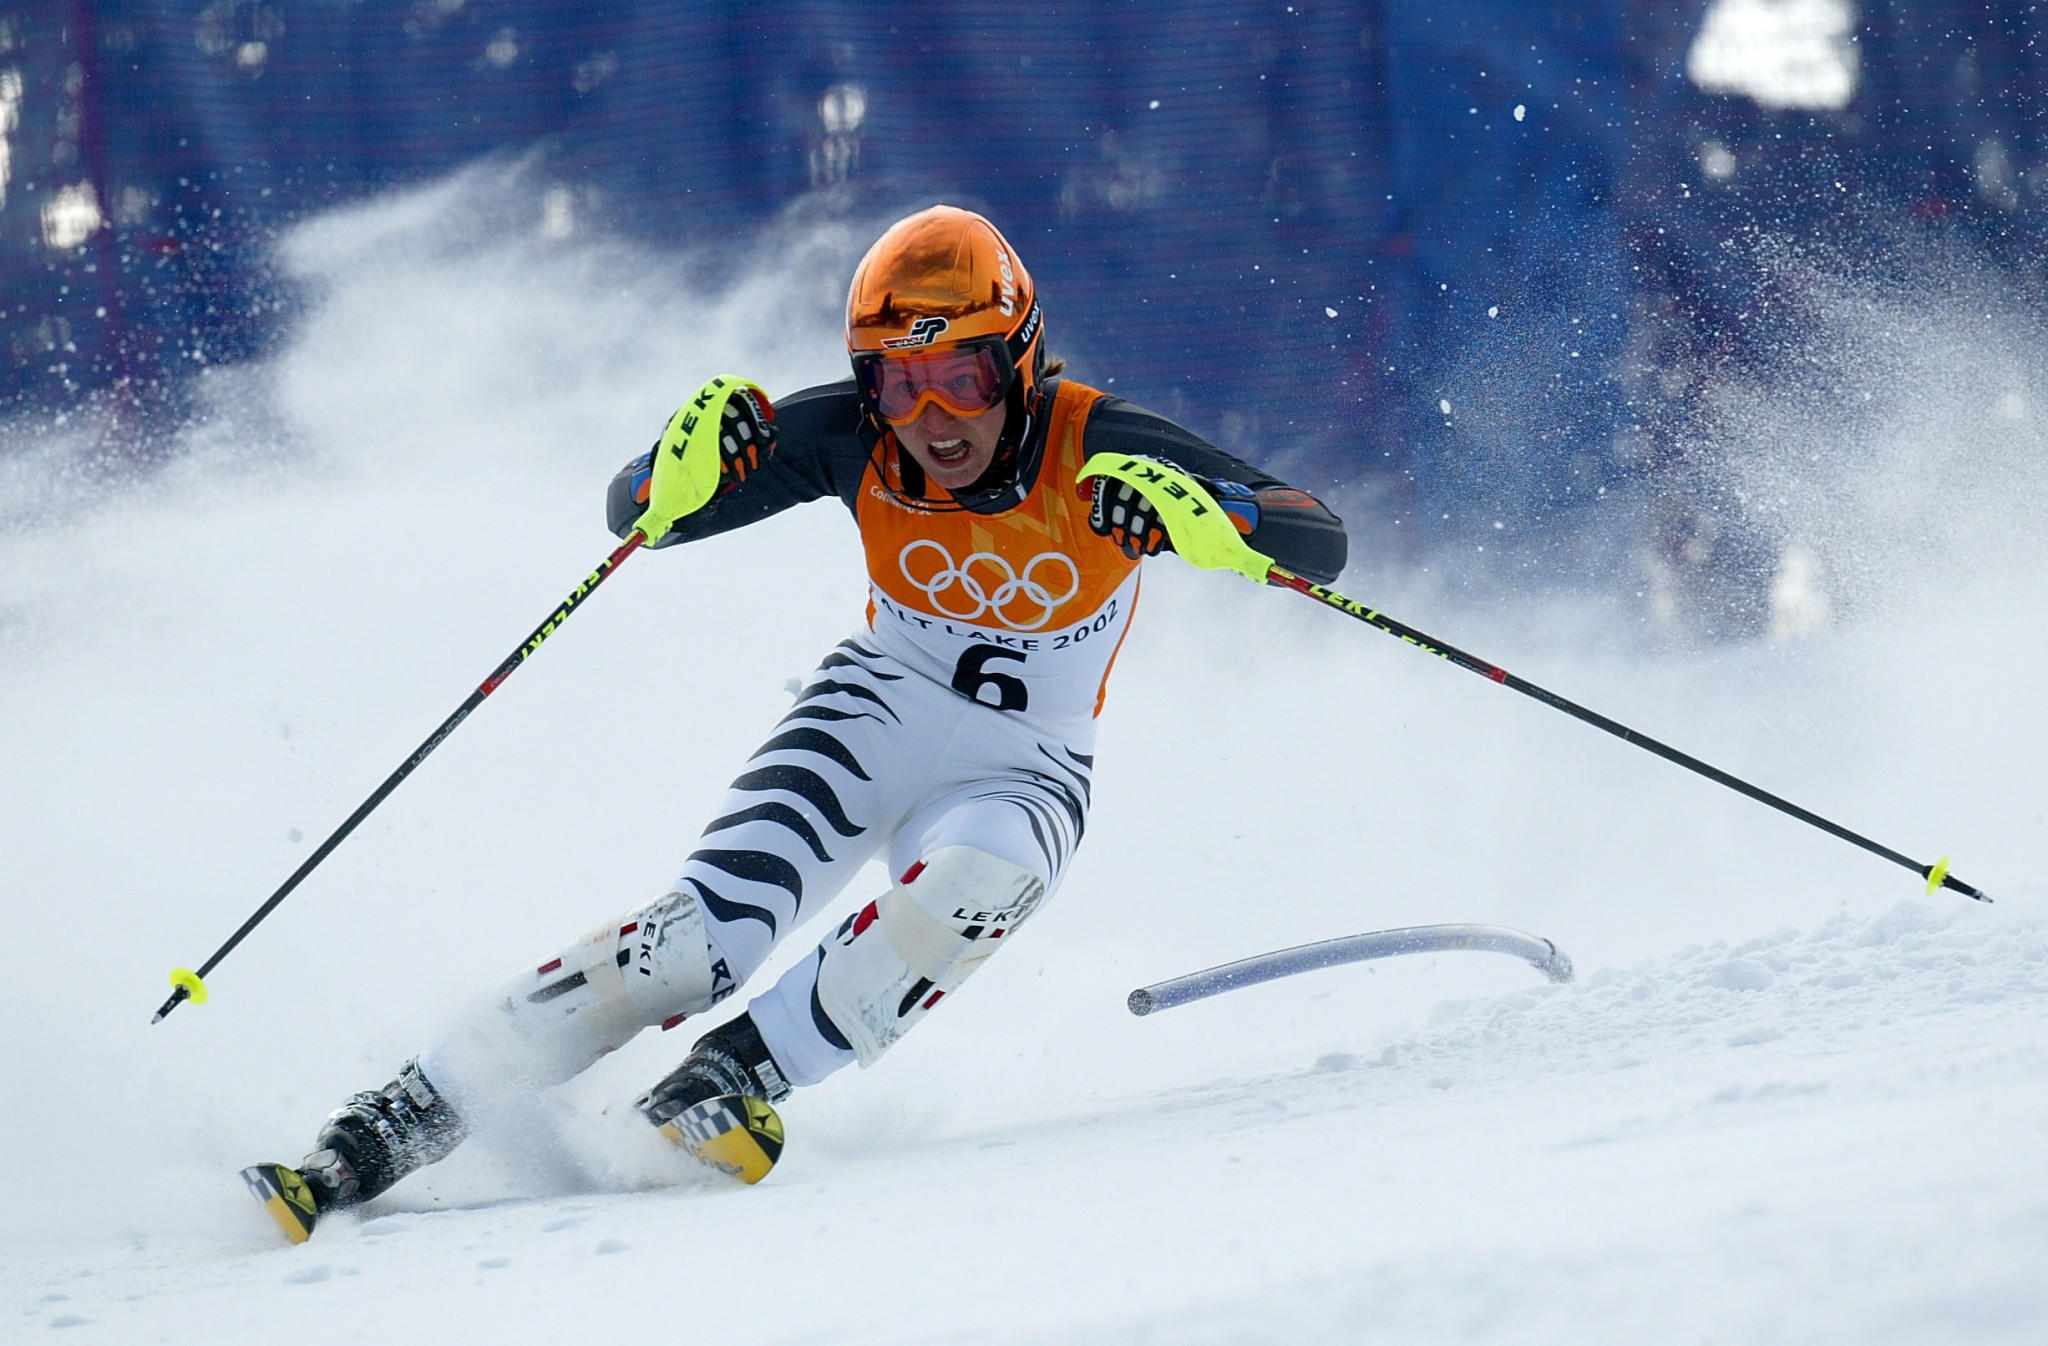 Five-time Olympian Martina Ertl was among the participants in the DOSB's LEAP scheme ©Getty Images